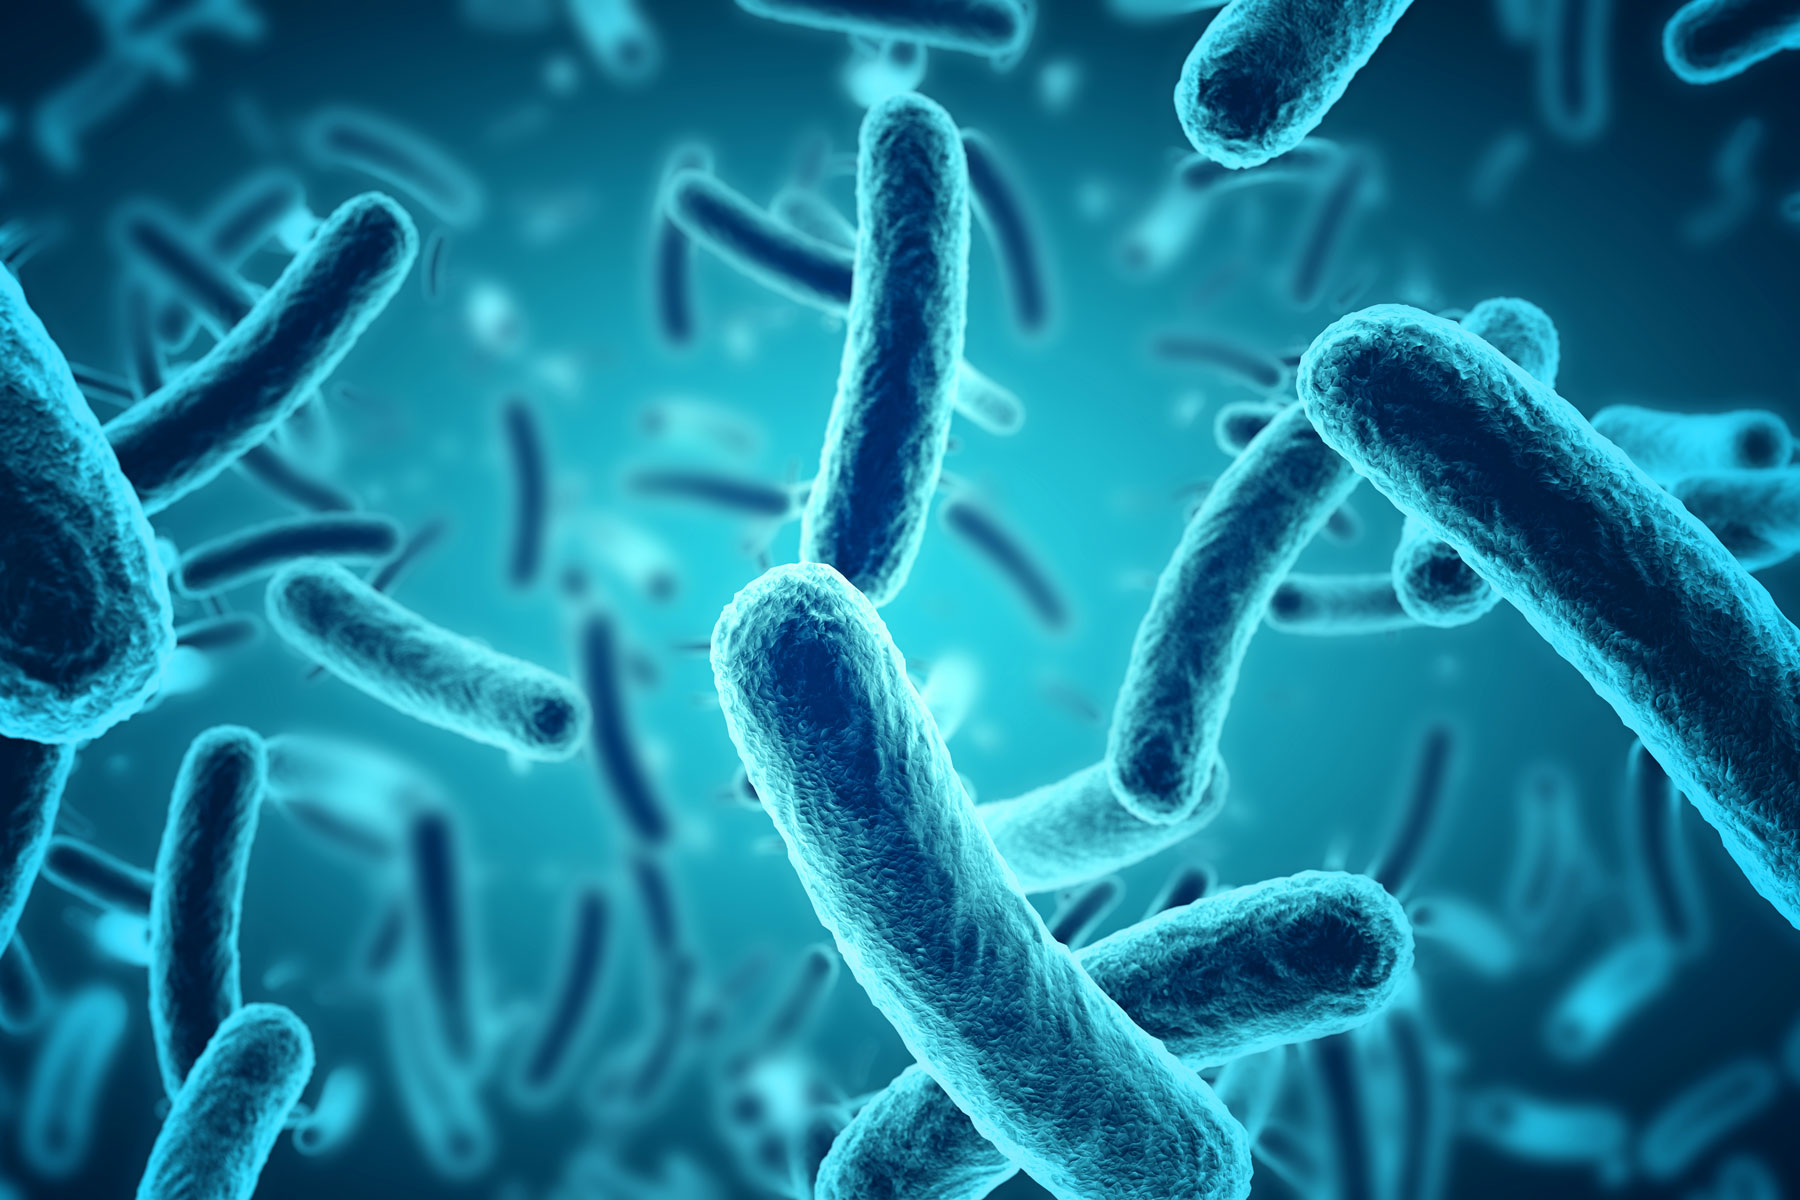 Using computer-based models, a USC research team studied how harmful bacteria survives and determined how to kill it. (Image/iStock)